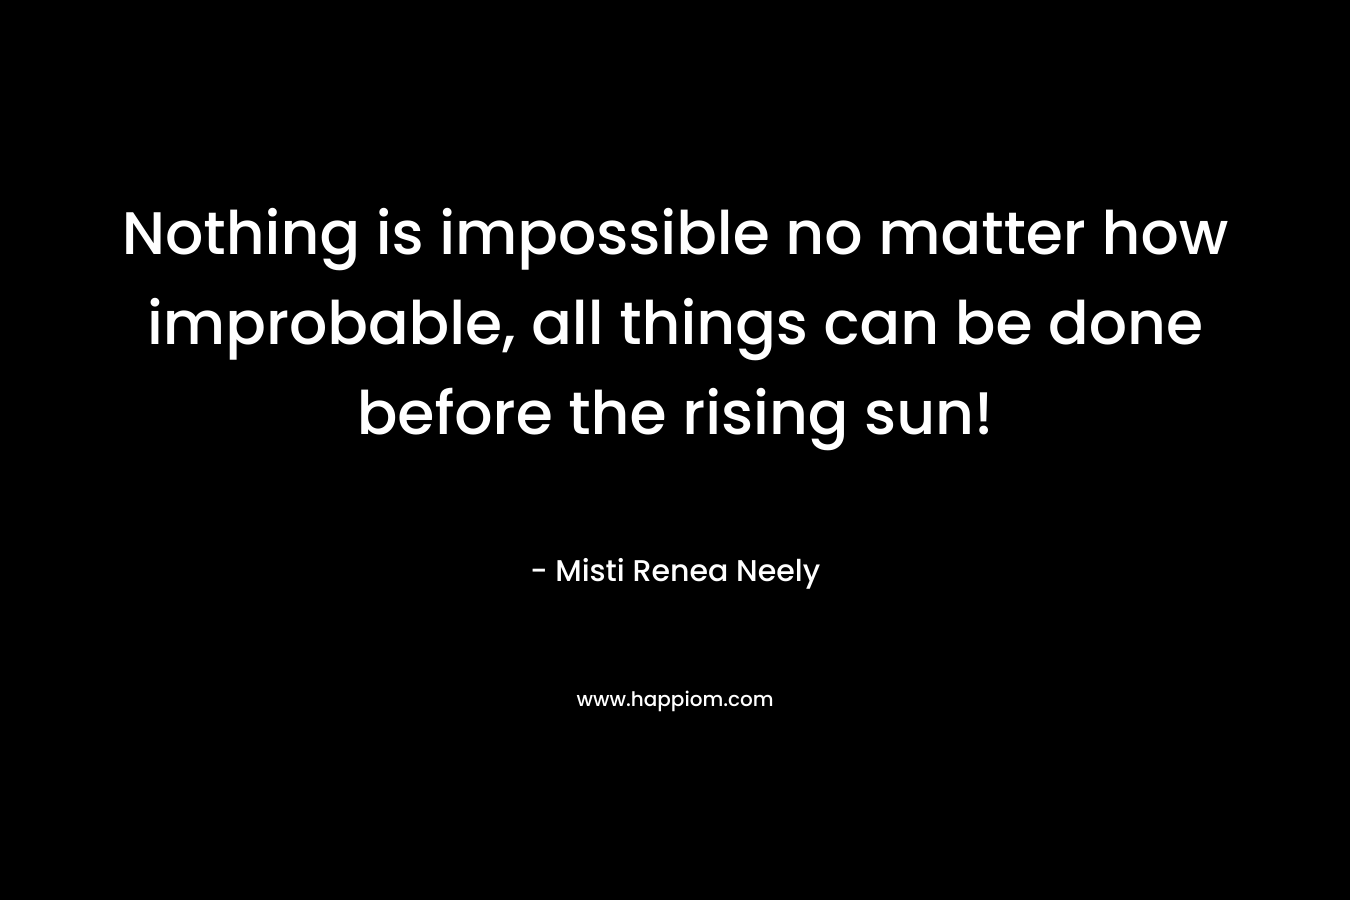 Nothing is impossible no matter how improbable, all things can be done before the rising sun!